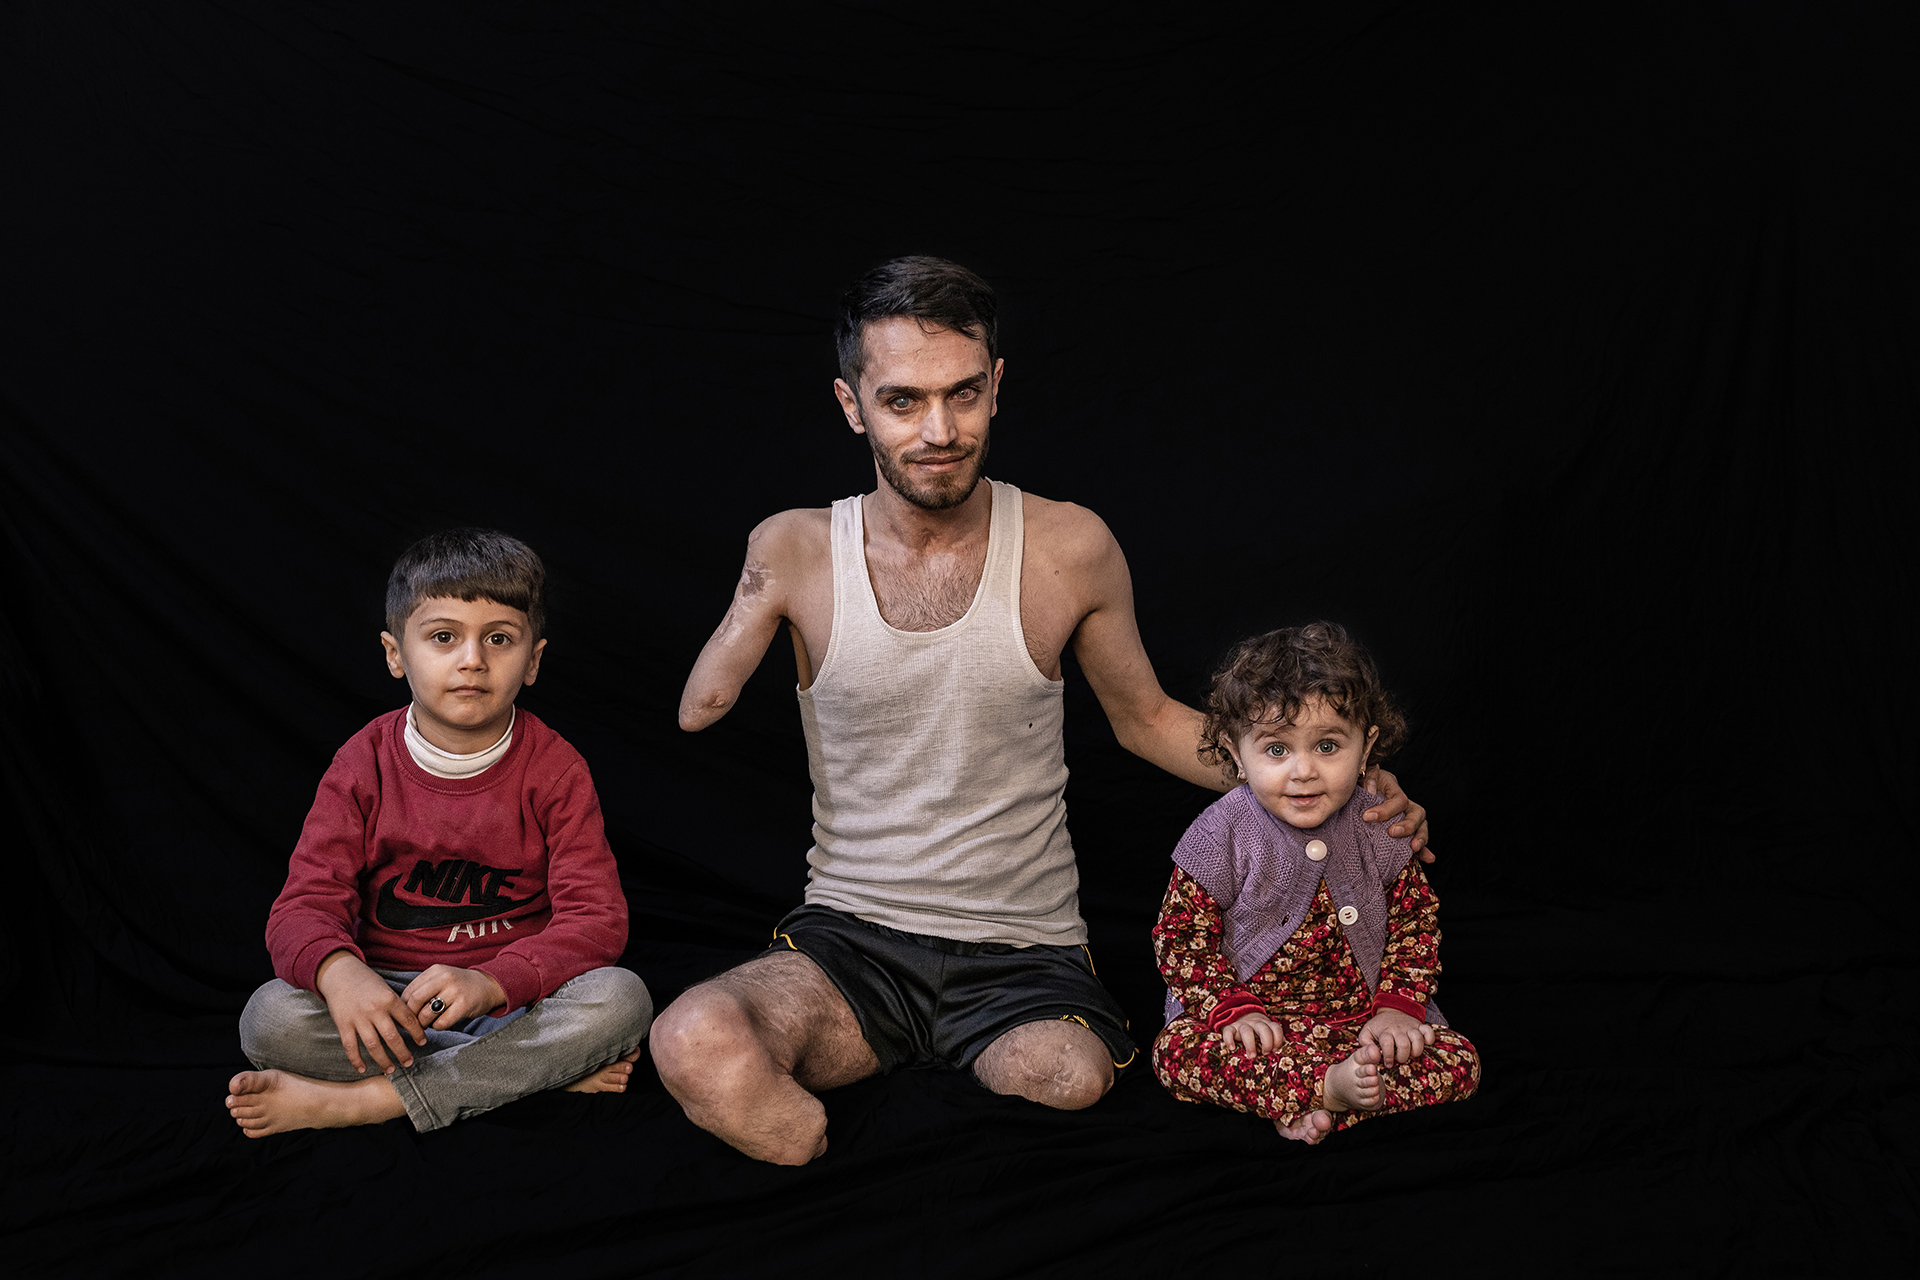 Salman Farman Saleh with his two kids, He was born in 1992 joined the Peshmerga in 2009. He was wounded in fighting ISIS in Dec 2014 in Makhmour near Mosul. As a member of a team that clears IEDs, he was cleaning a field of mines when one exploded near him. The blast took both his legs, one hand, one eye, and an ear. He has a 100% disability. He has two kids.